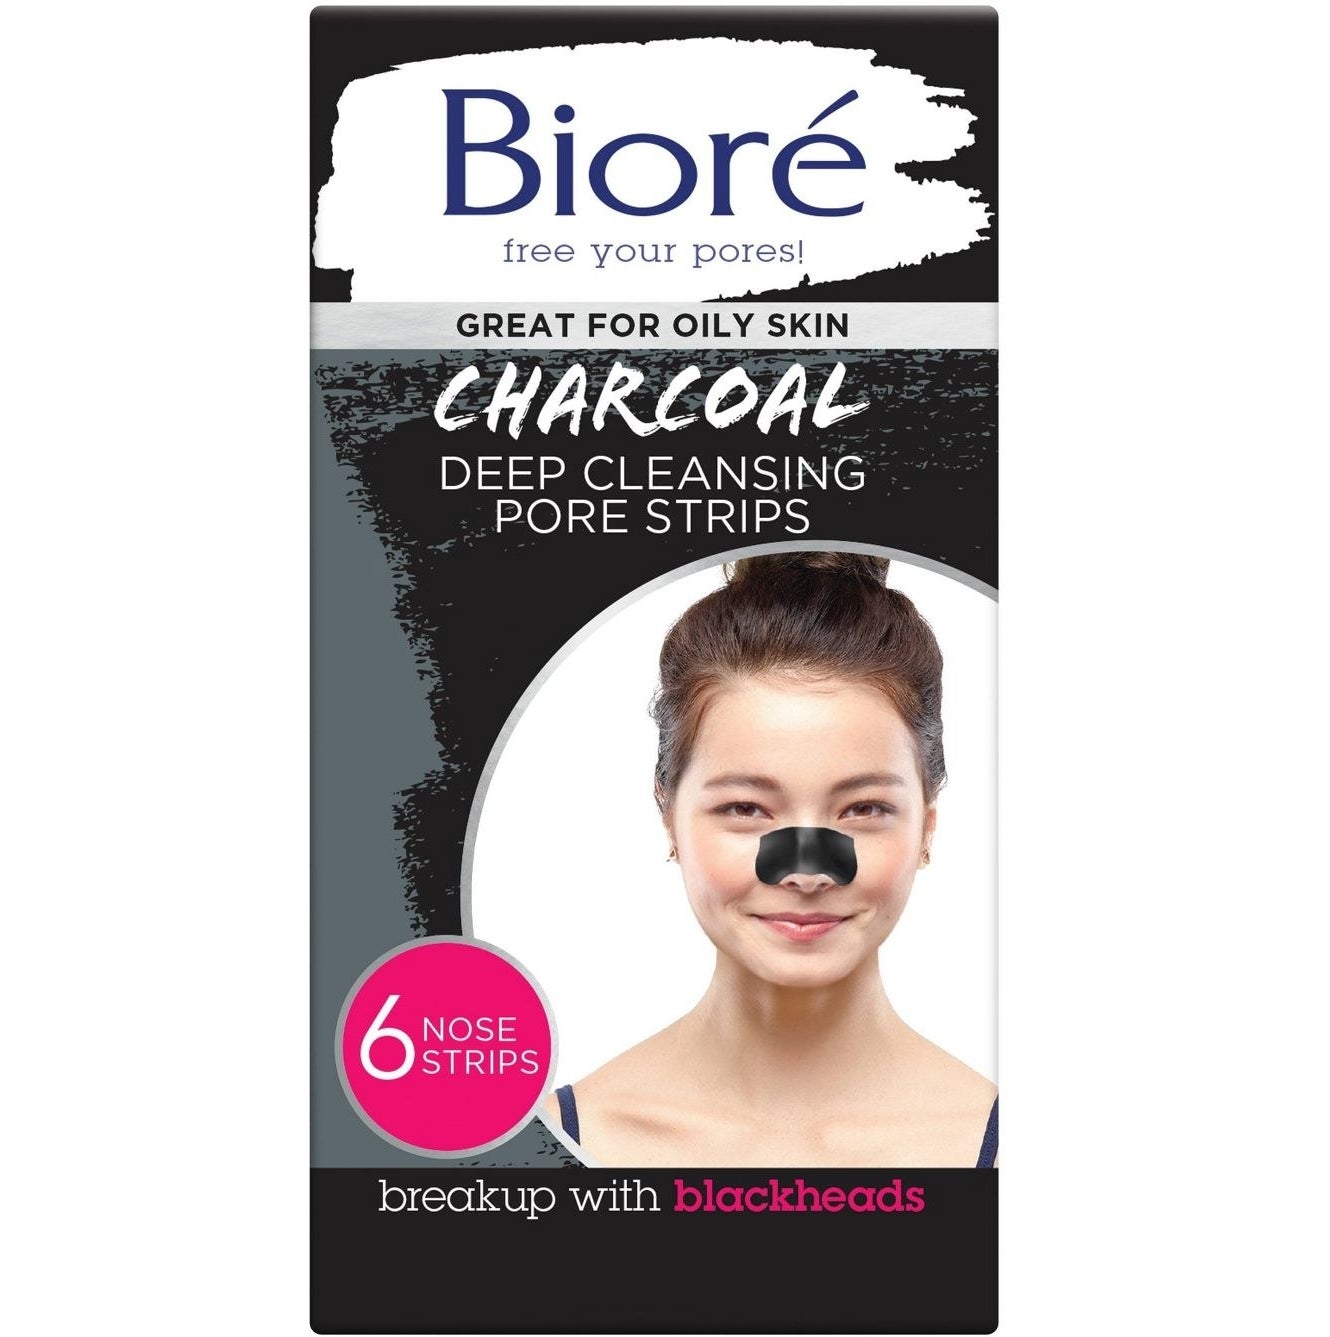 The pack of Bioré charcoal deep cleansing pore strips